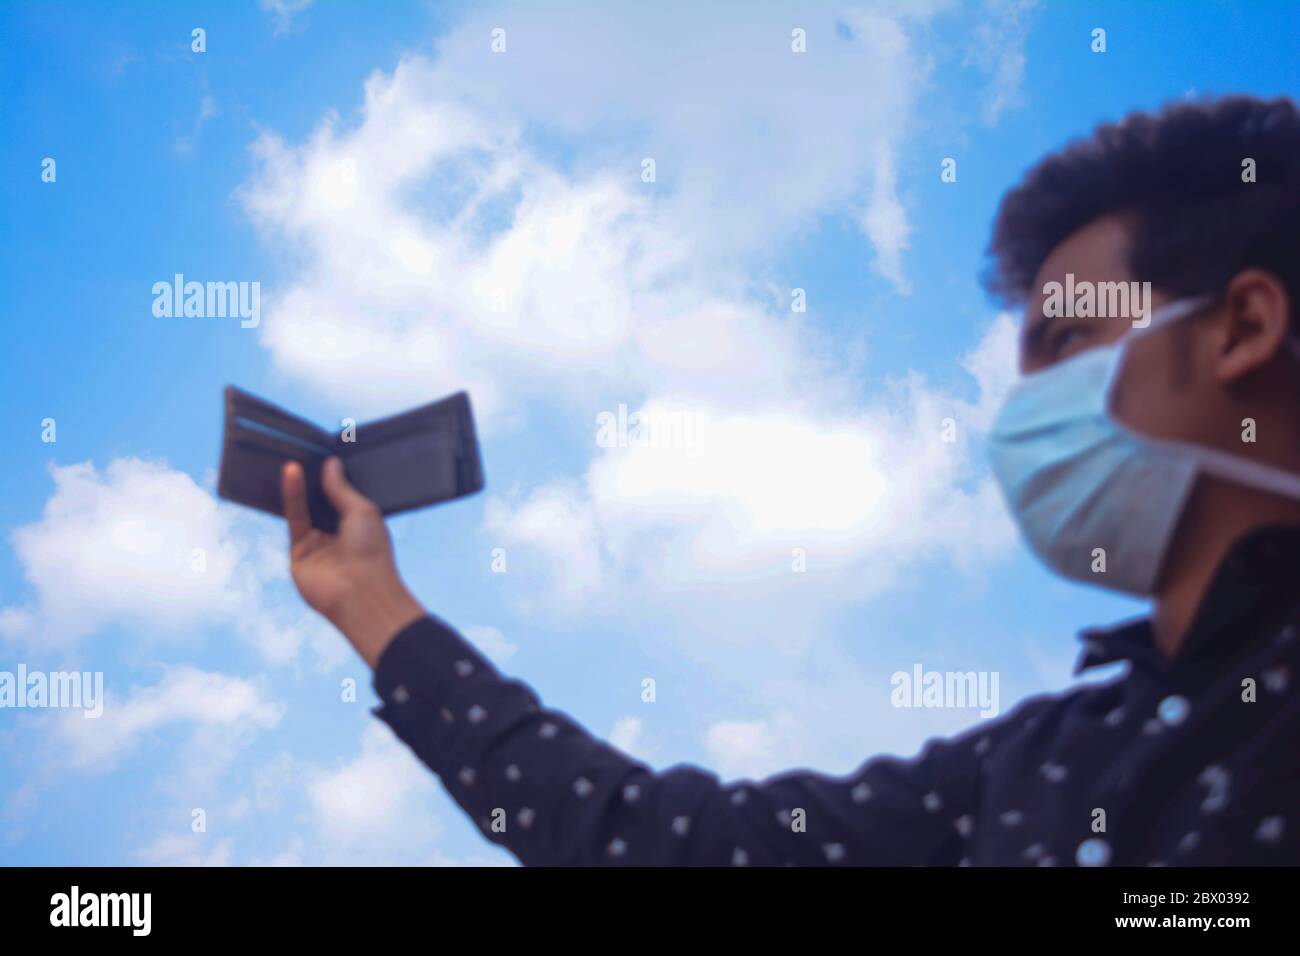 Man wearing face mask and showing his wallet on blue sky background.selective focus on sky. Stock Photo